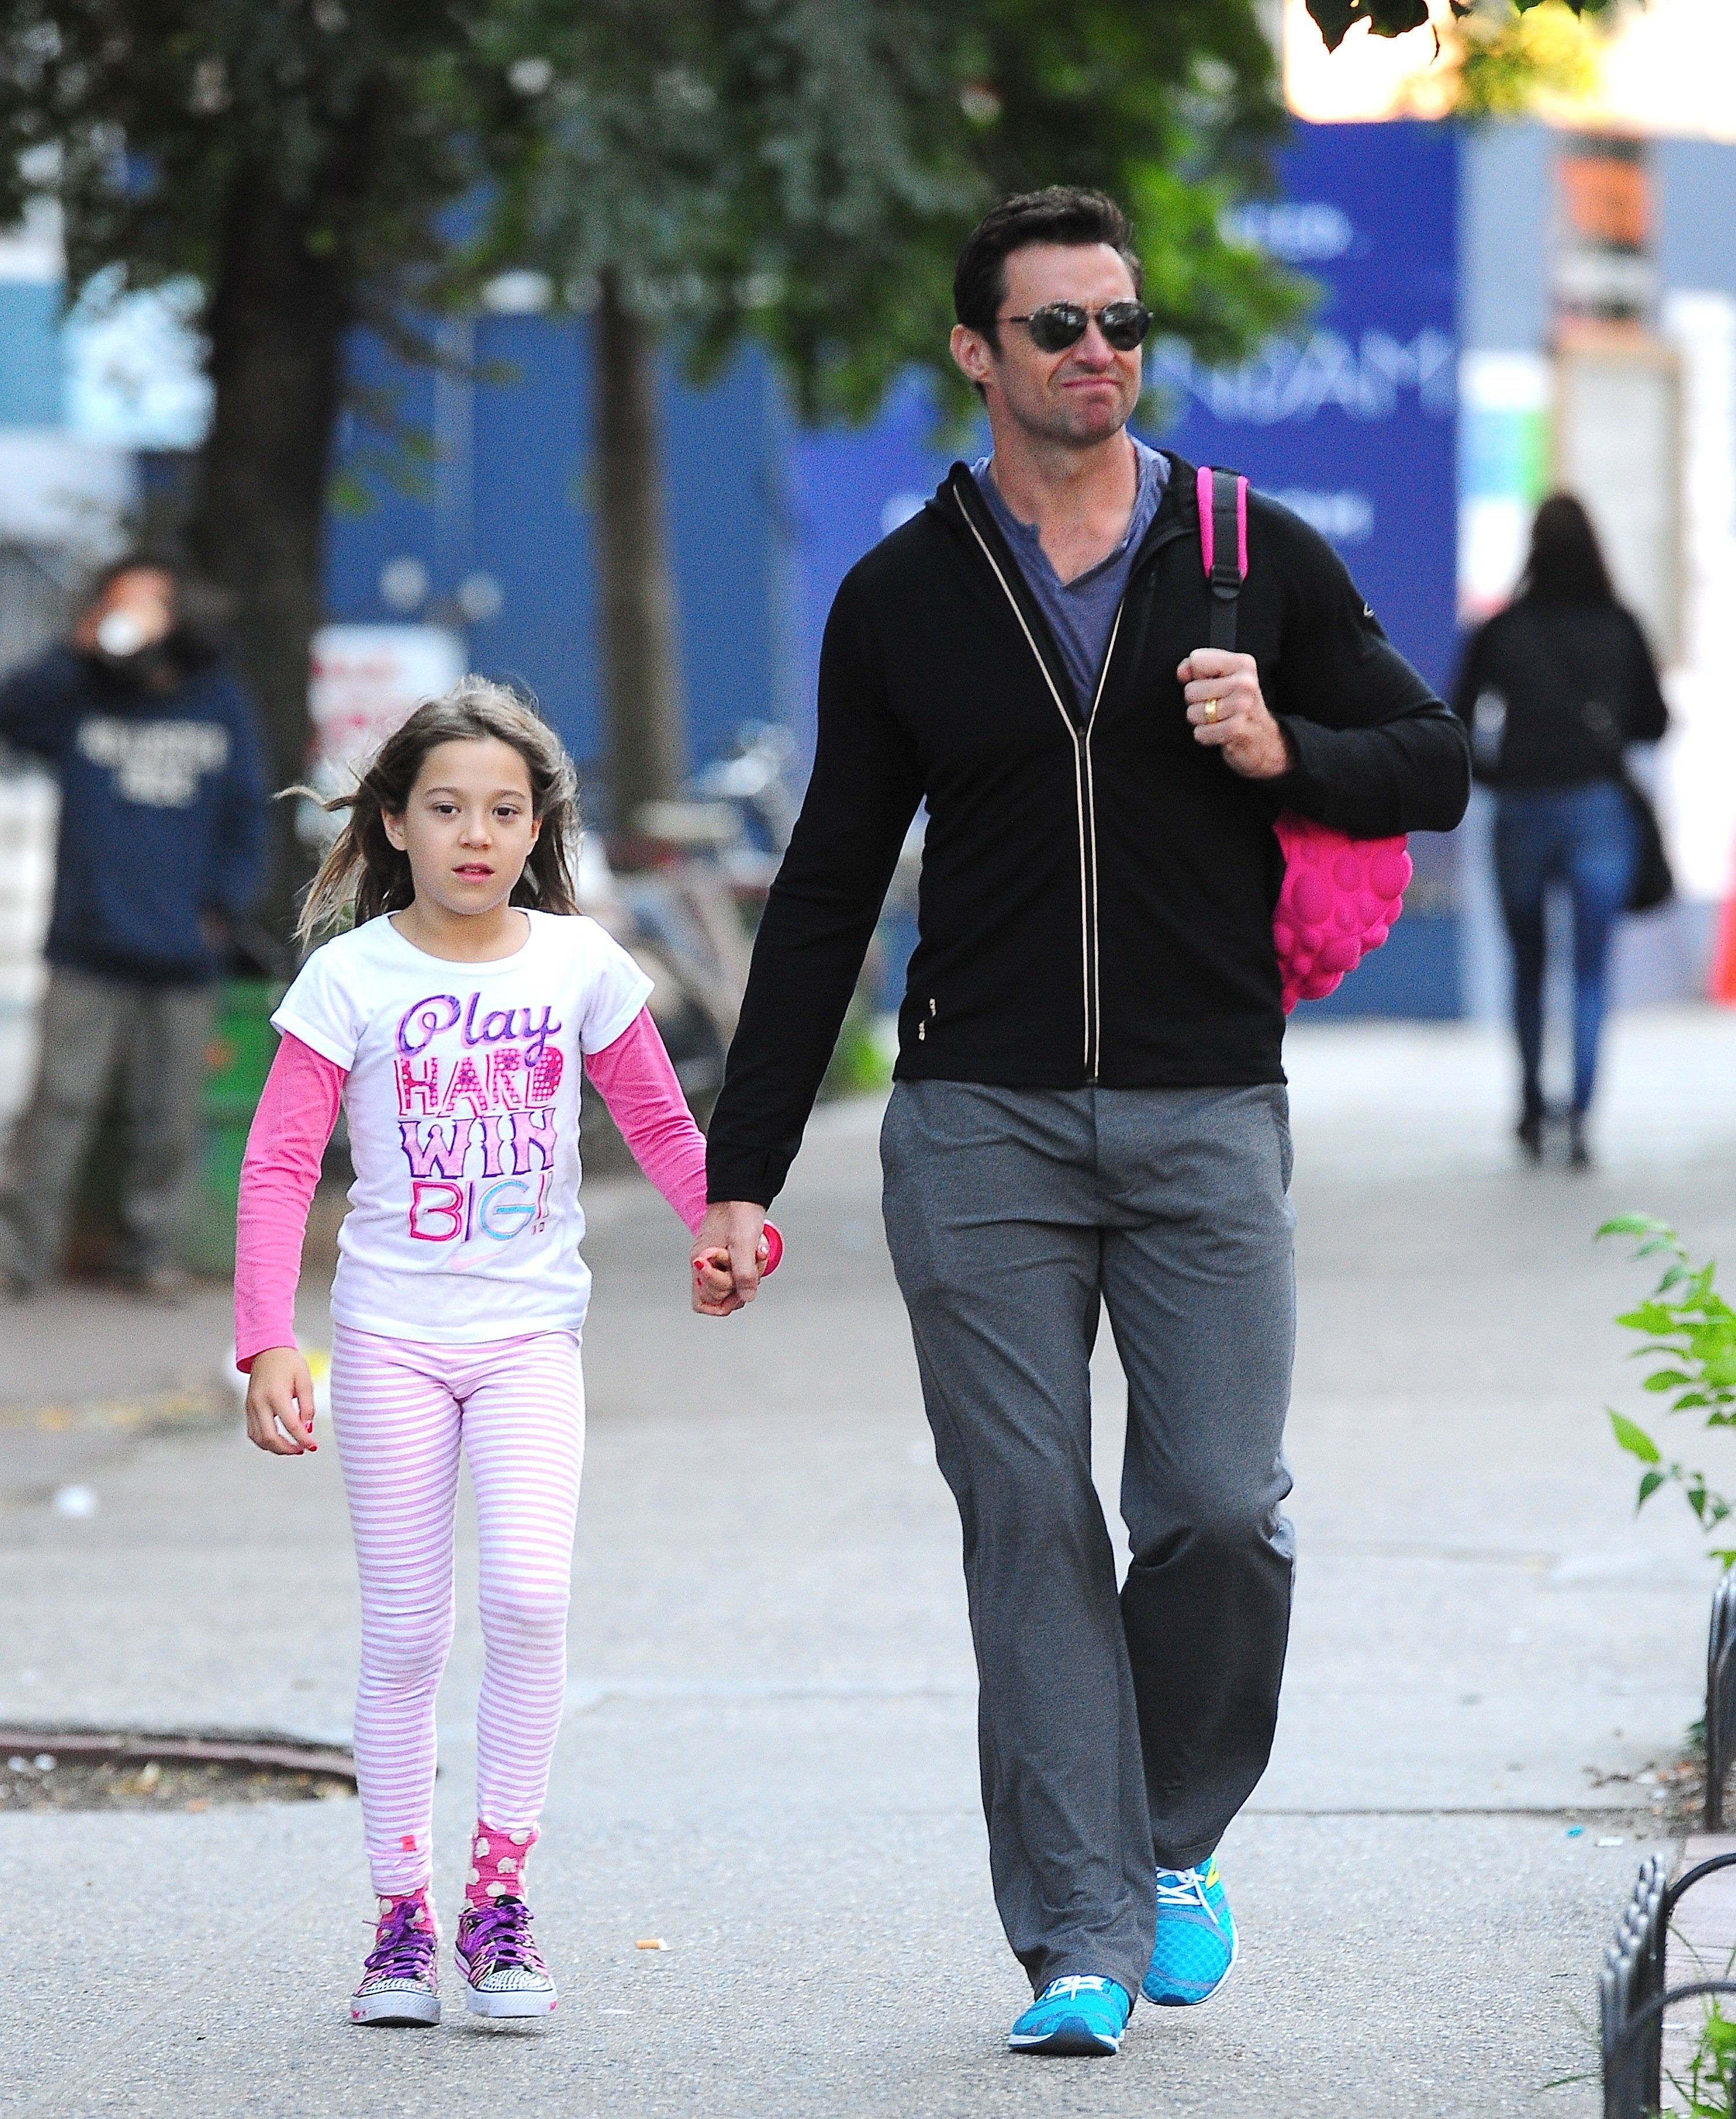 Ava Eliot Jackman and Hugh Jackman in New York on September 17, 2013 | Source: Getty Images